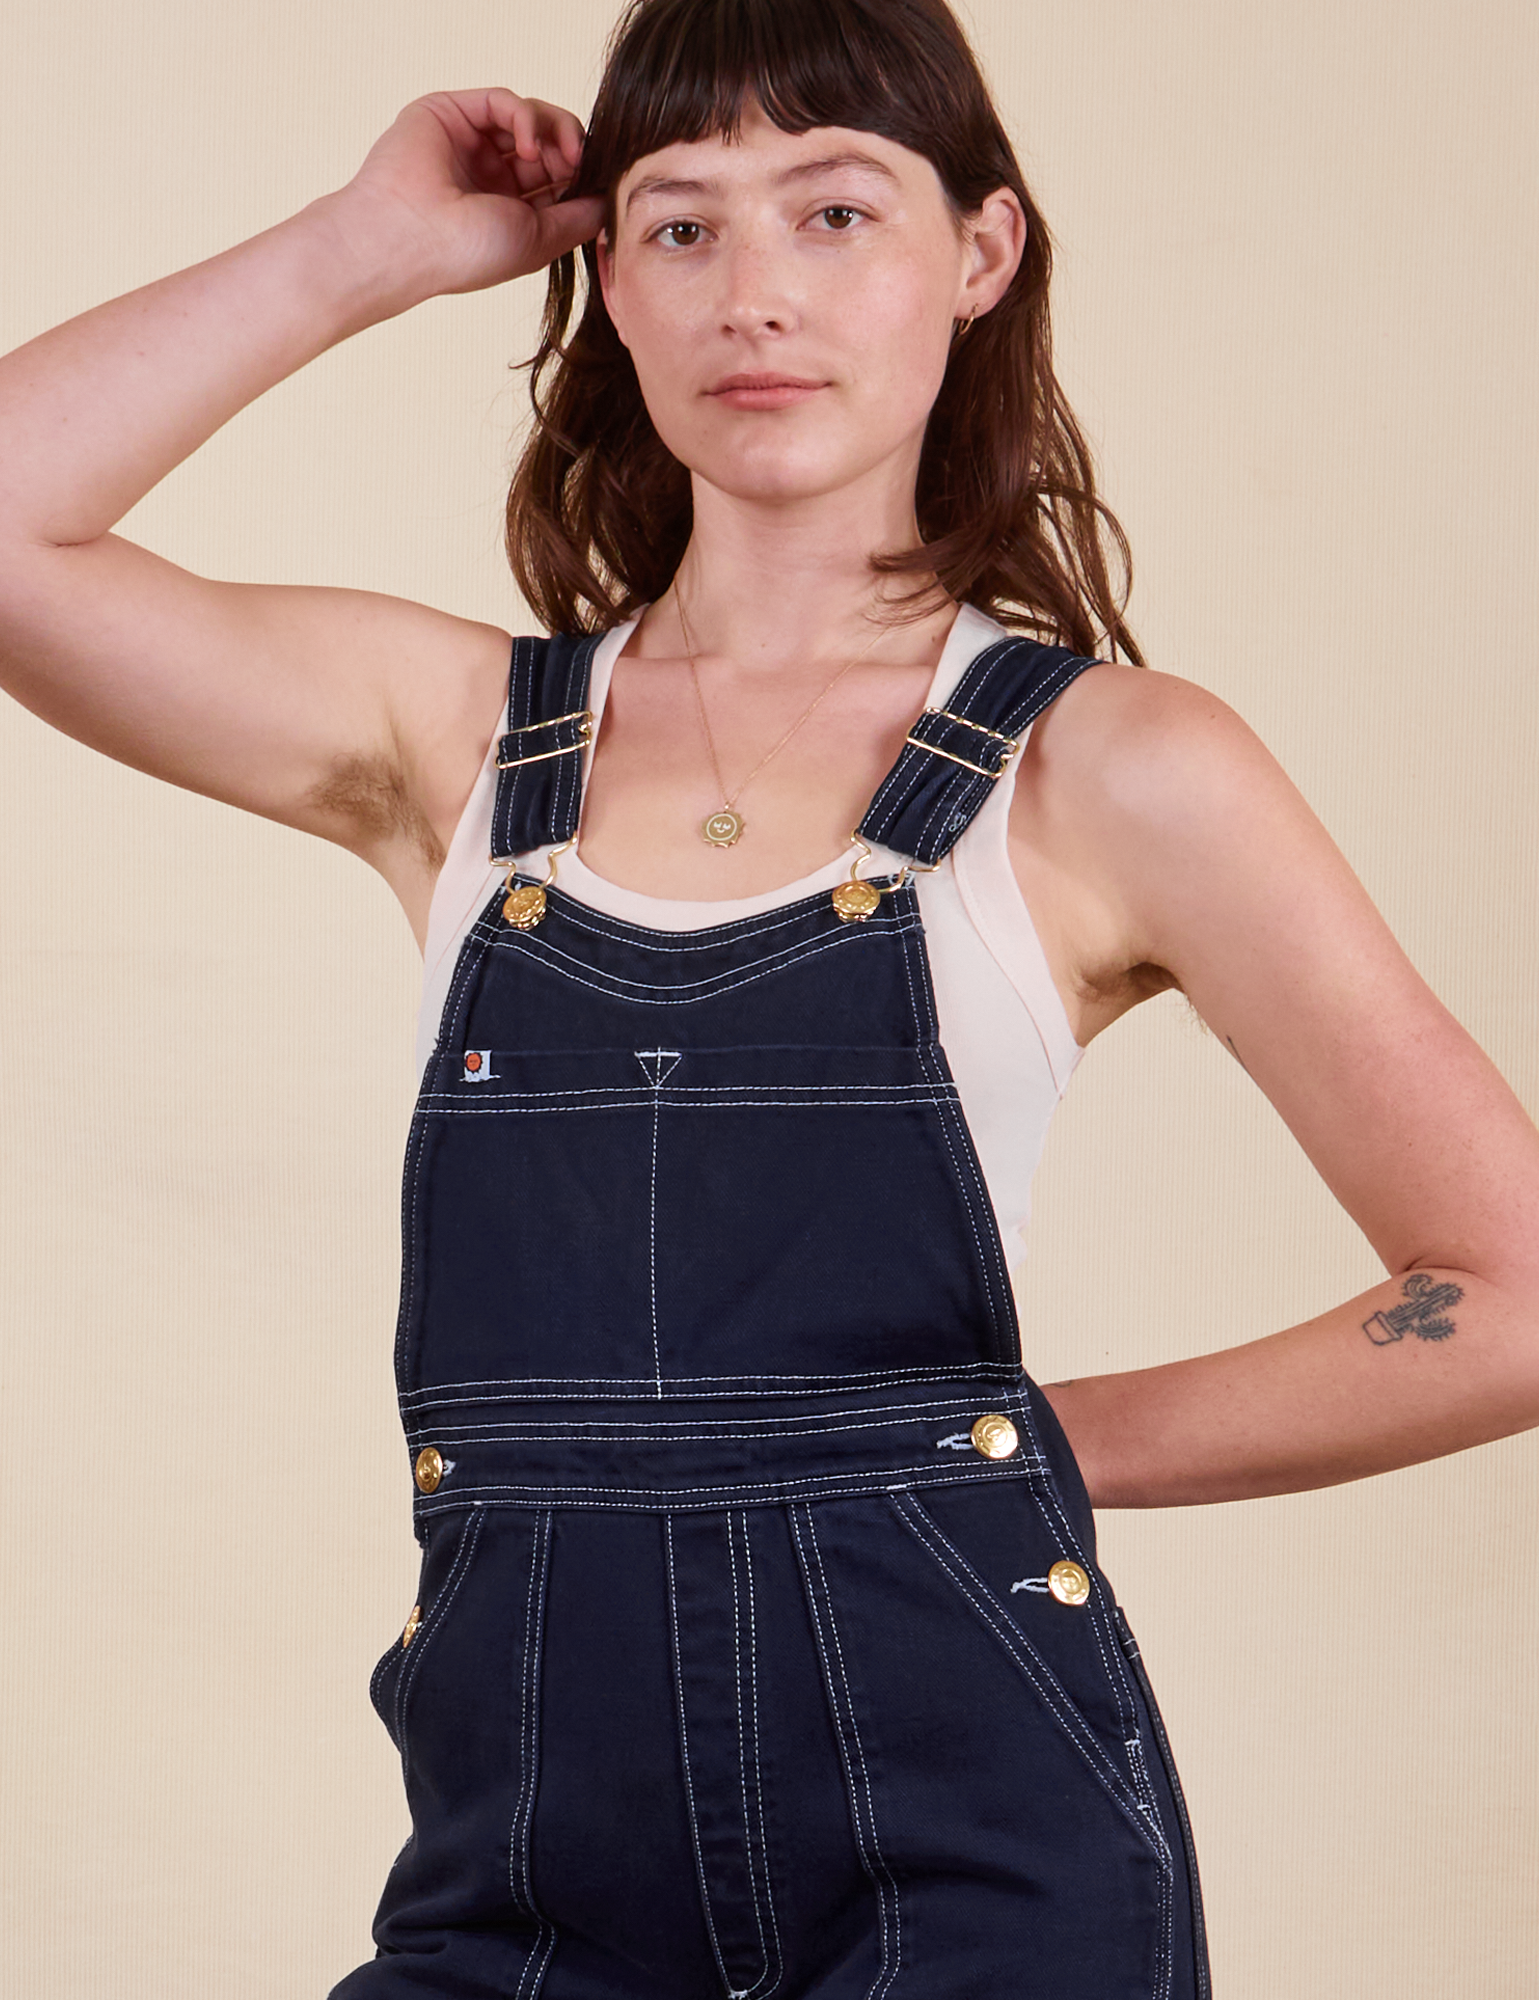 Alex is wearing Original Overalls in Navy Blue and vintage off-white Tank Top